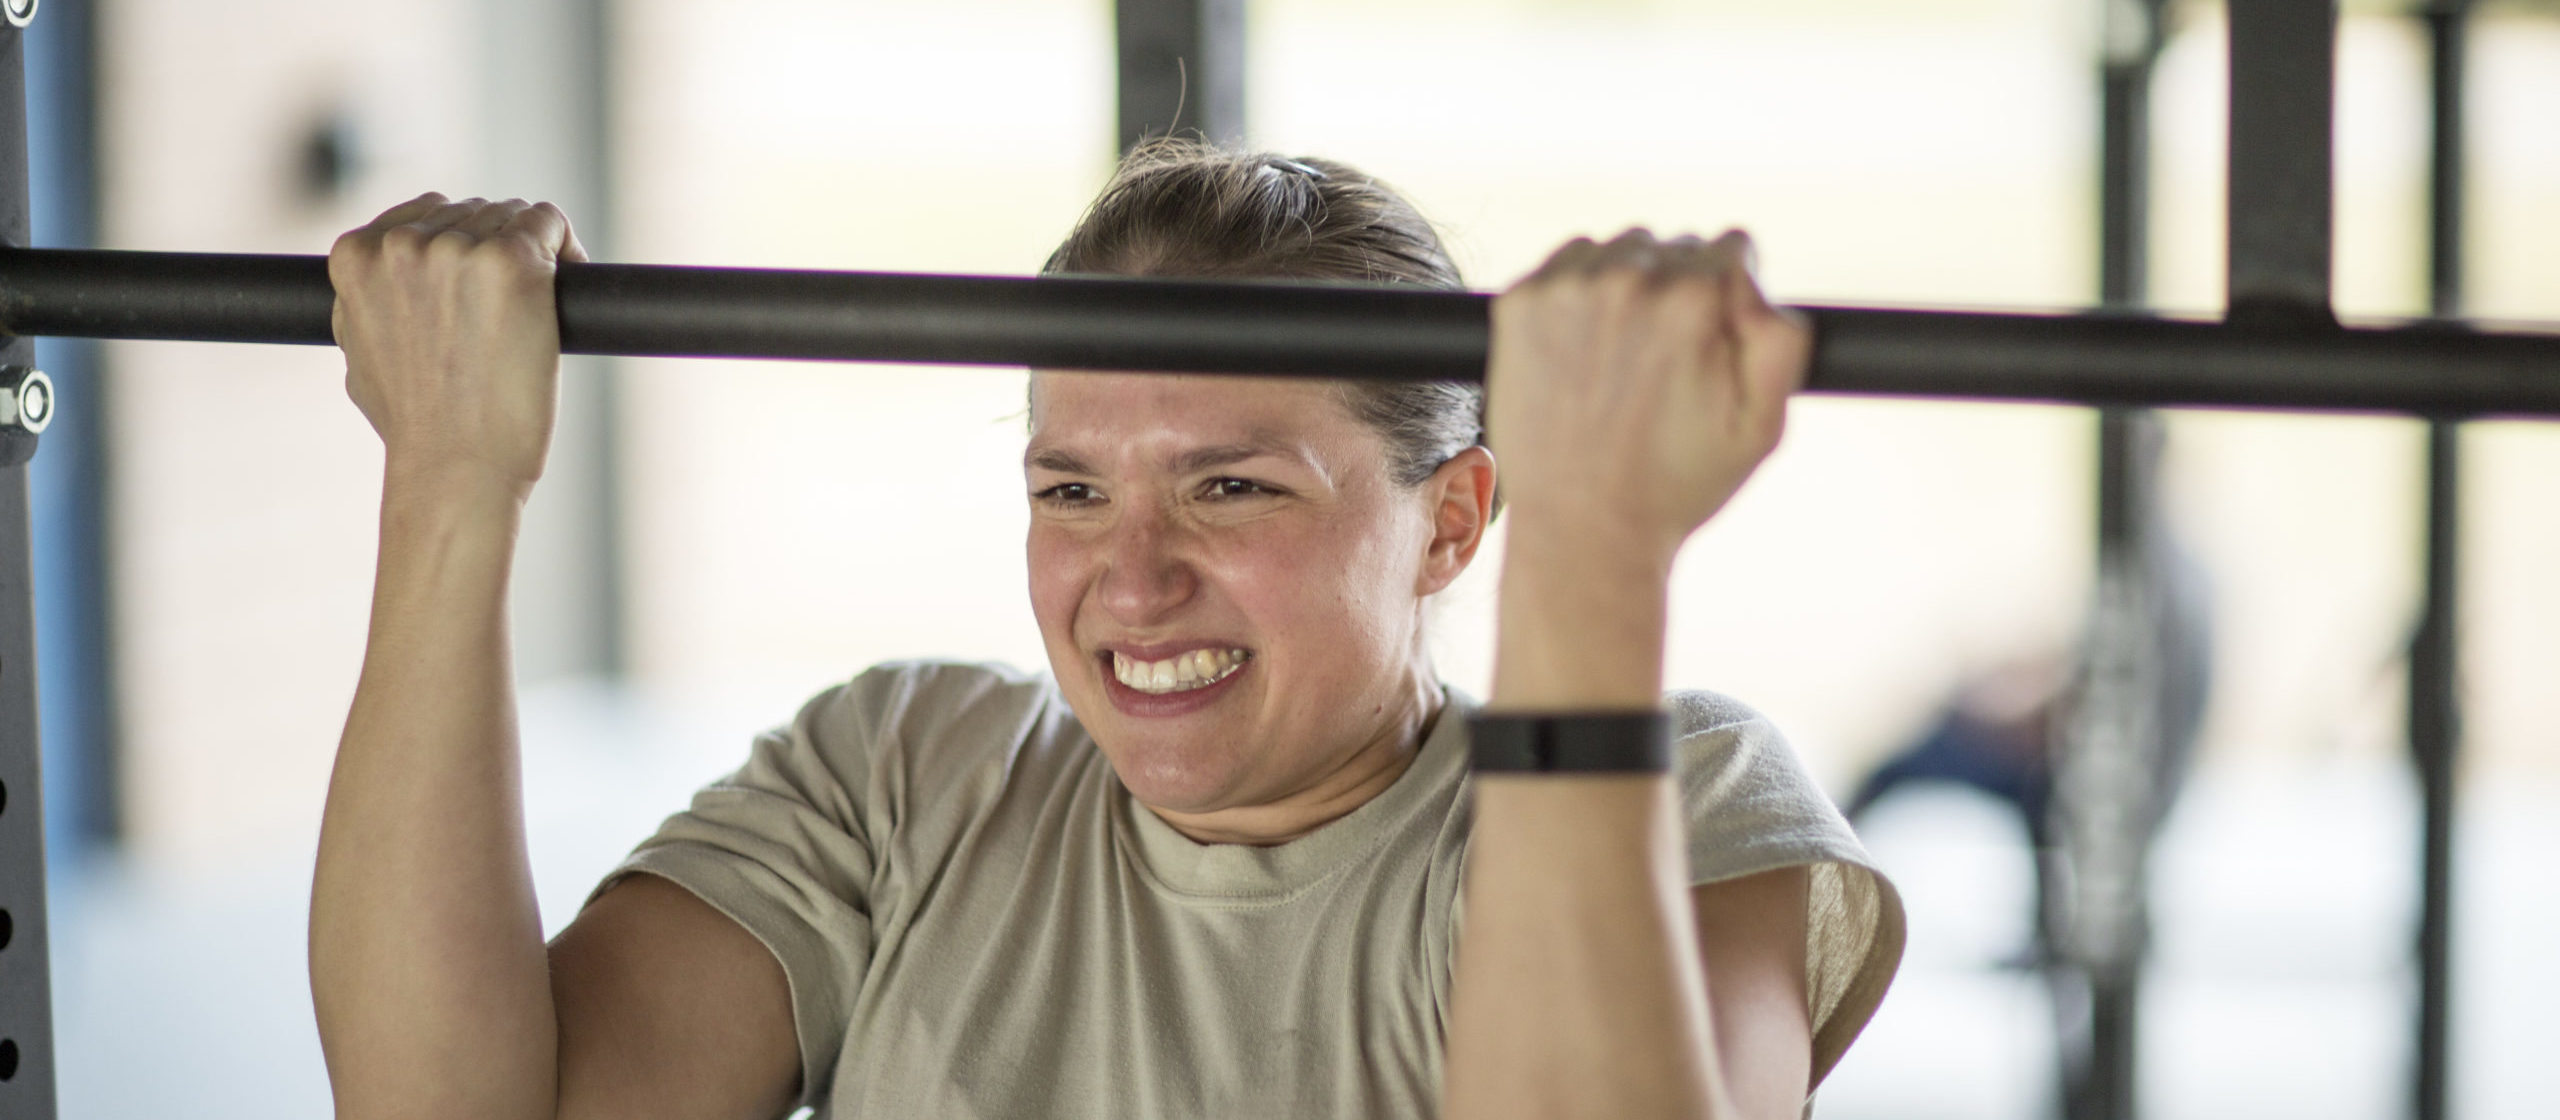 Determined female soldier doing pull ups at military air force base